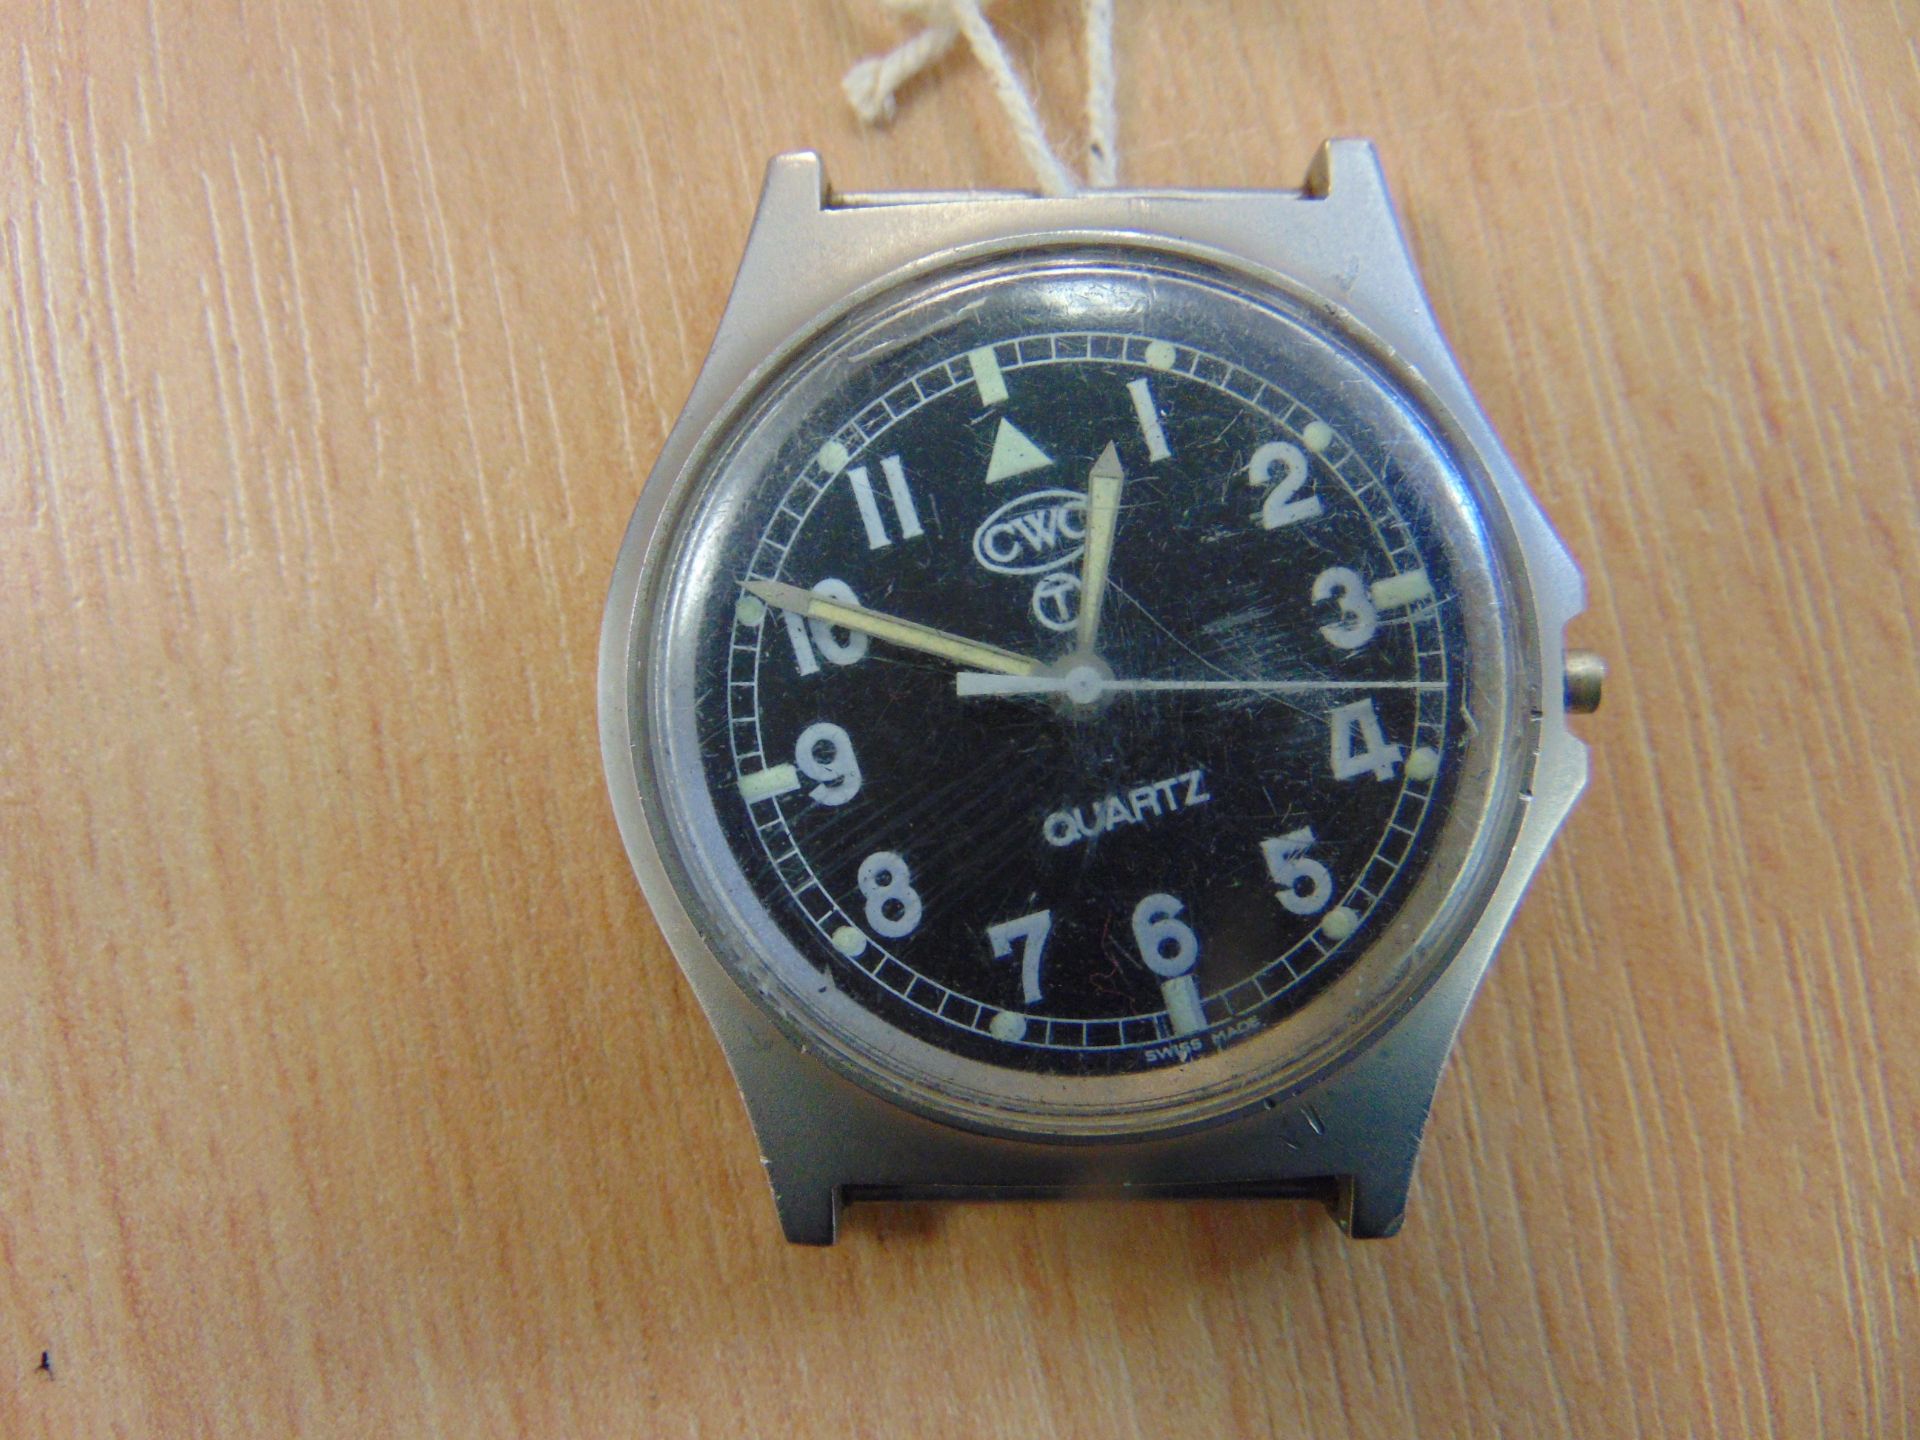 2X CWC 0552 ROYAL MARINES ISSUE SERVICE WATCHES NATO MARKED DATE: 1988/89 - SPARES/ REPAIR - Image 5 of 9